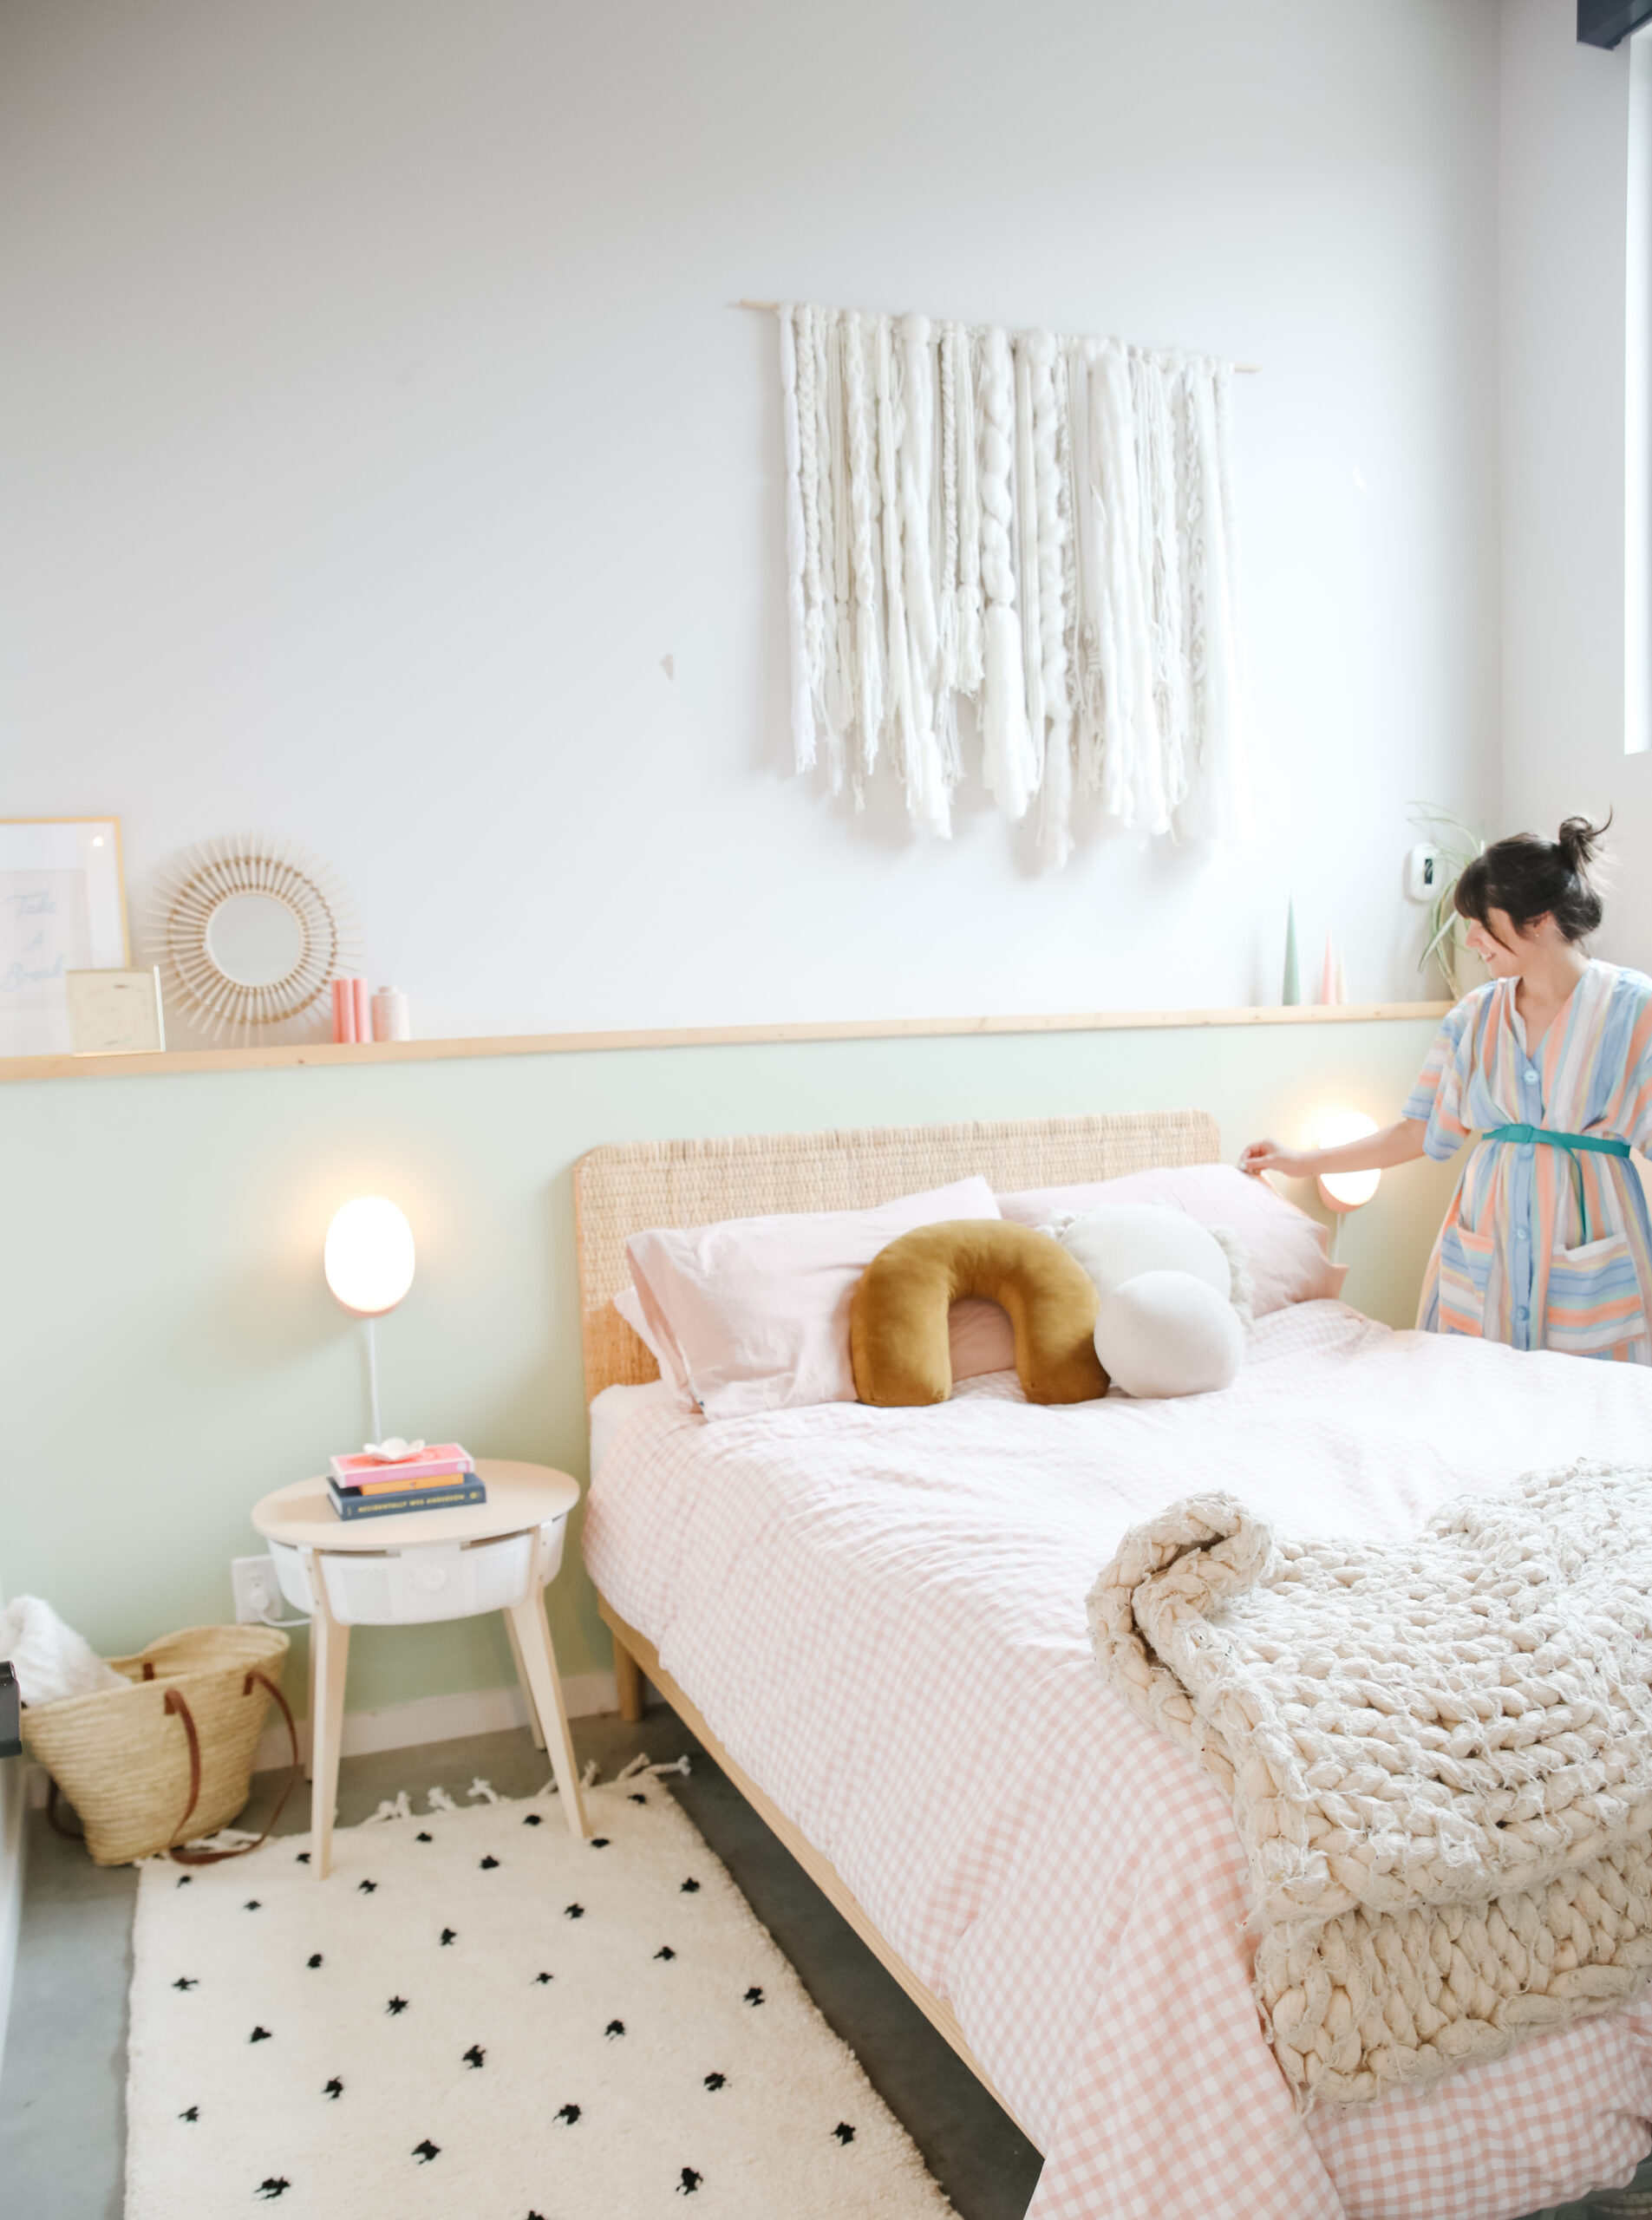 Before & After: Our Bedroom Makeover For Spring is Here!